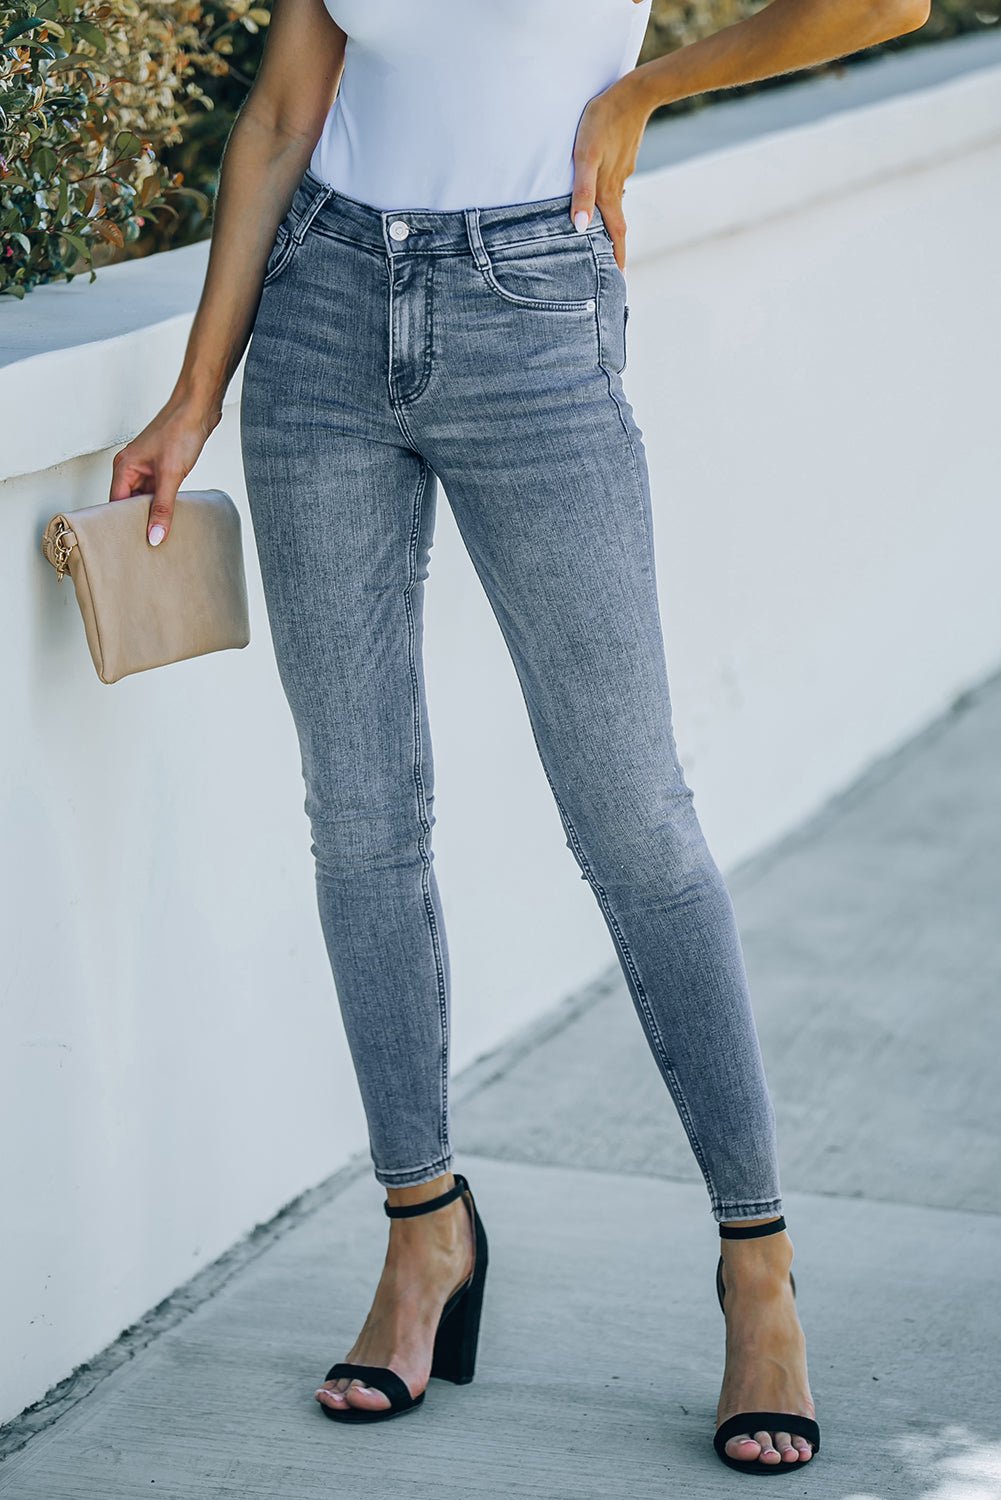 Ankle-Length Skinny Jeans with Pockets - Fashion Girl Online Store